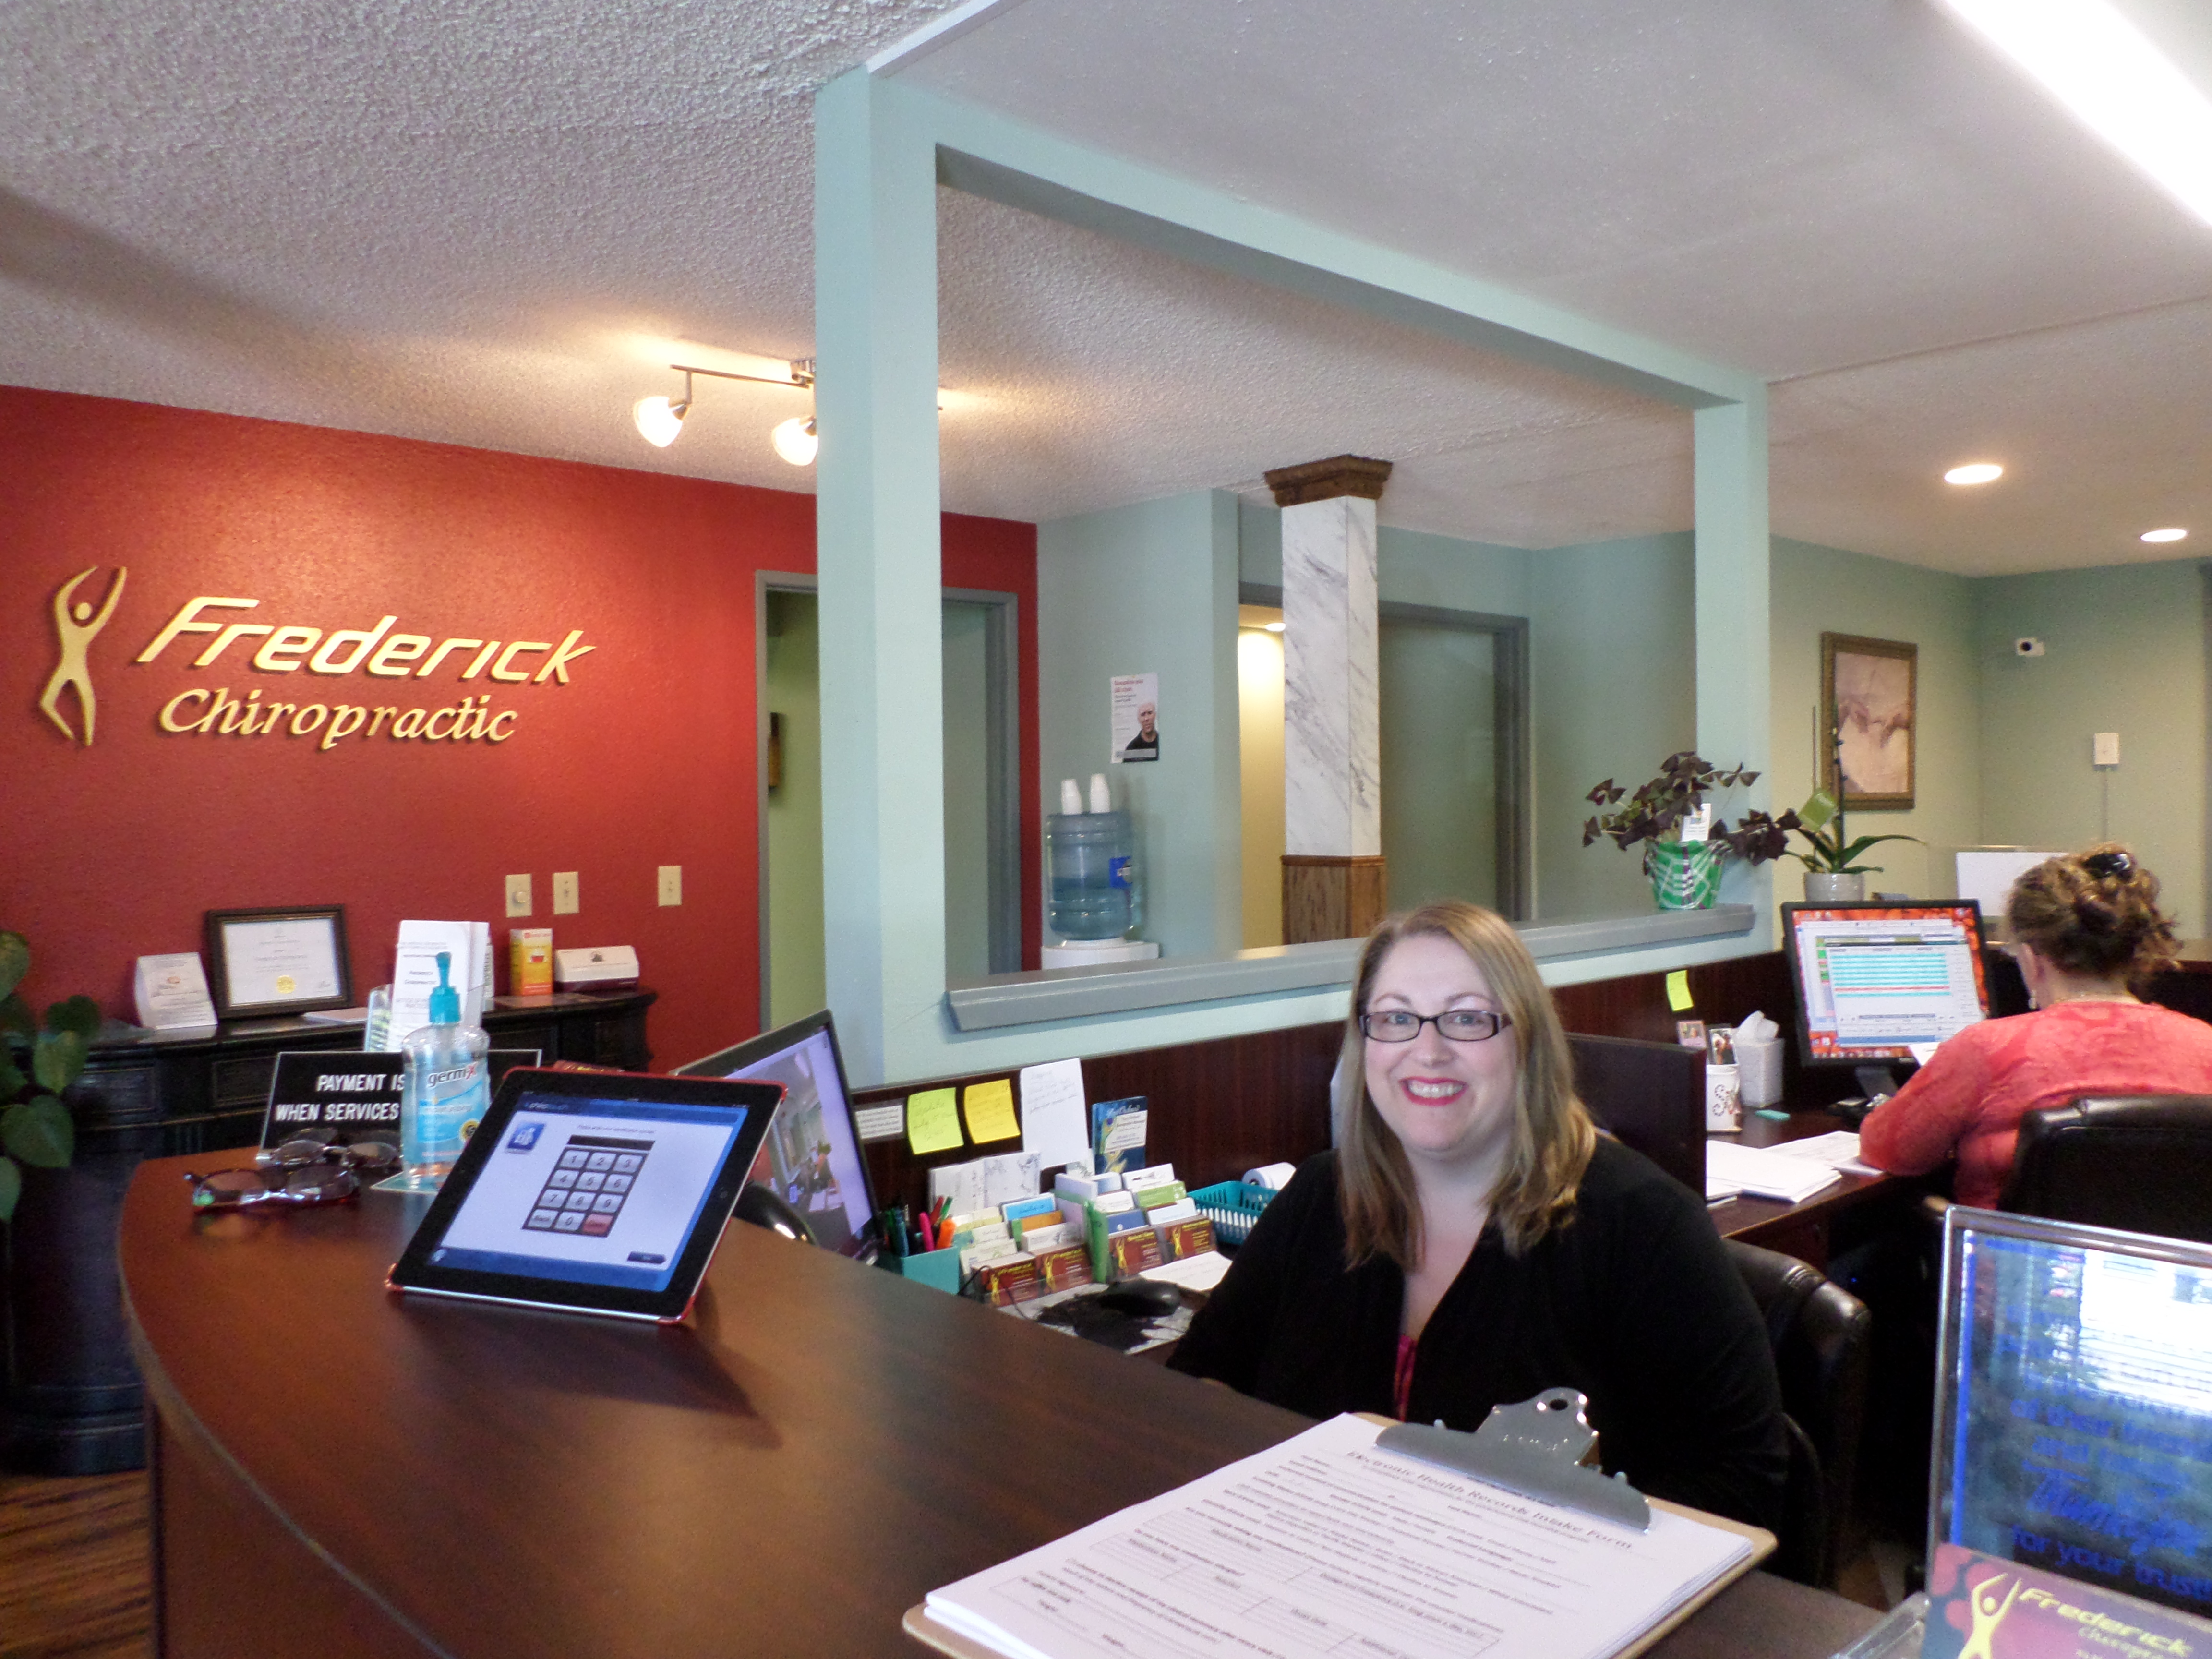 Frederick Chiropractic and Busso Chiropractic Photo